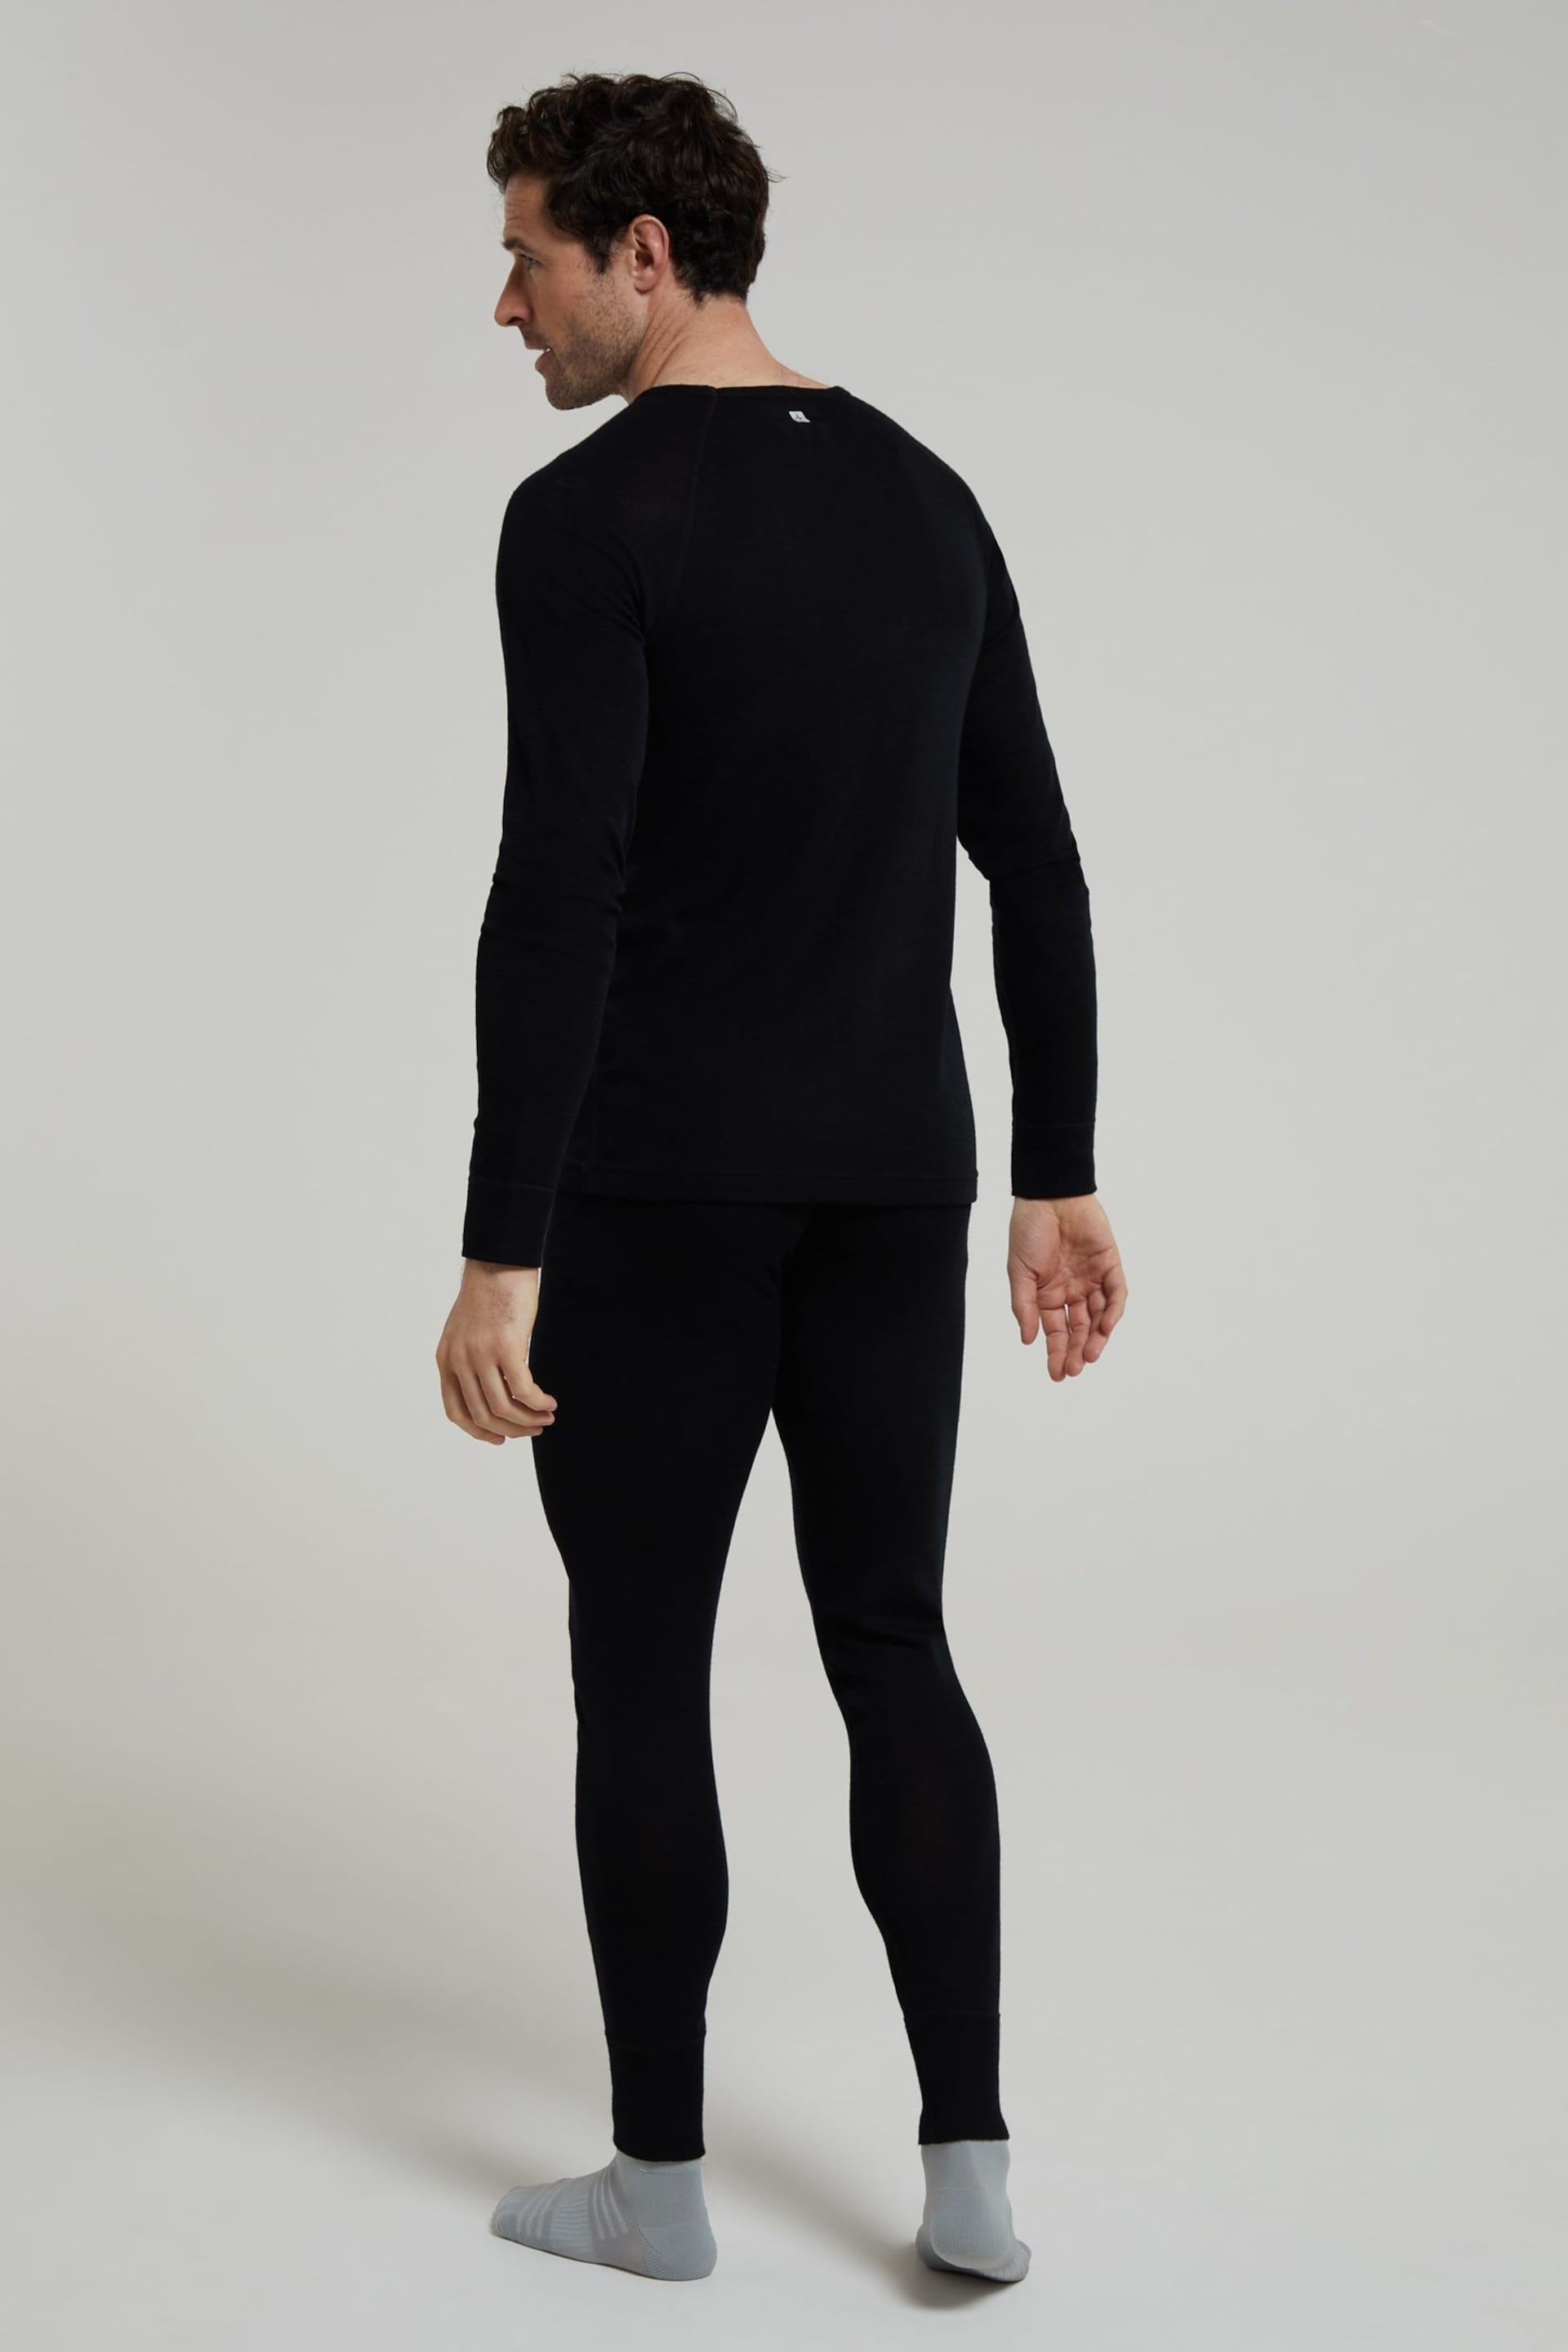 Mountain Warehouse Black Merino Mens Thermal Joggers with Fly - Image 2 of 4